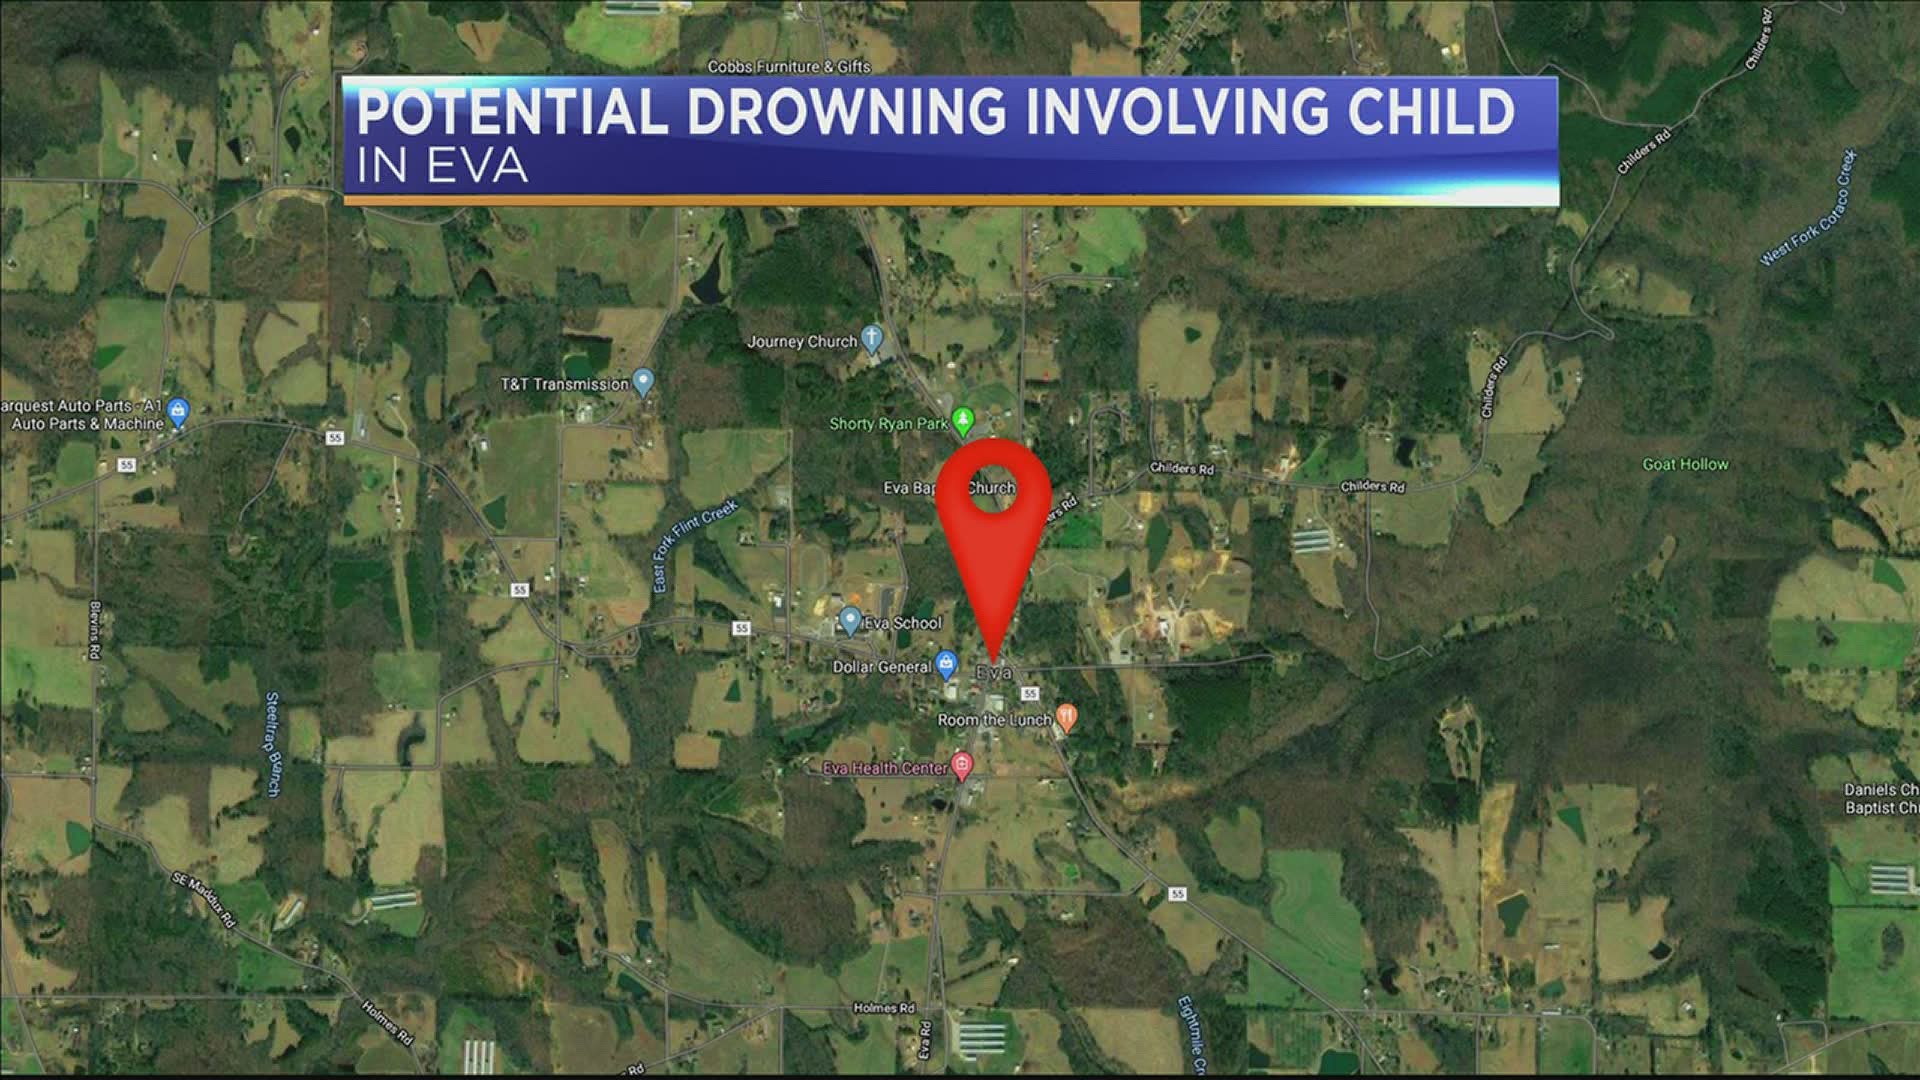 A rescue involving a possible child drowning is underway in Eva.